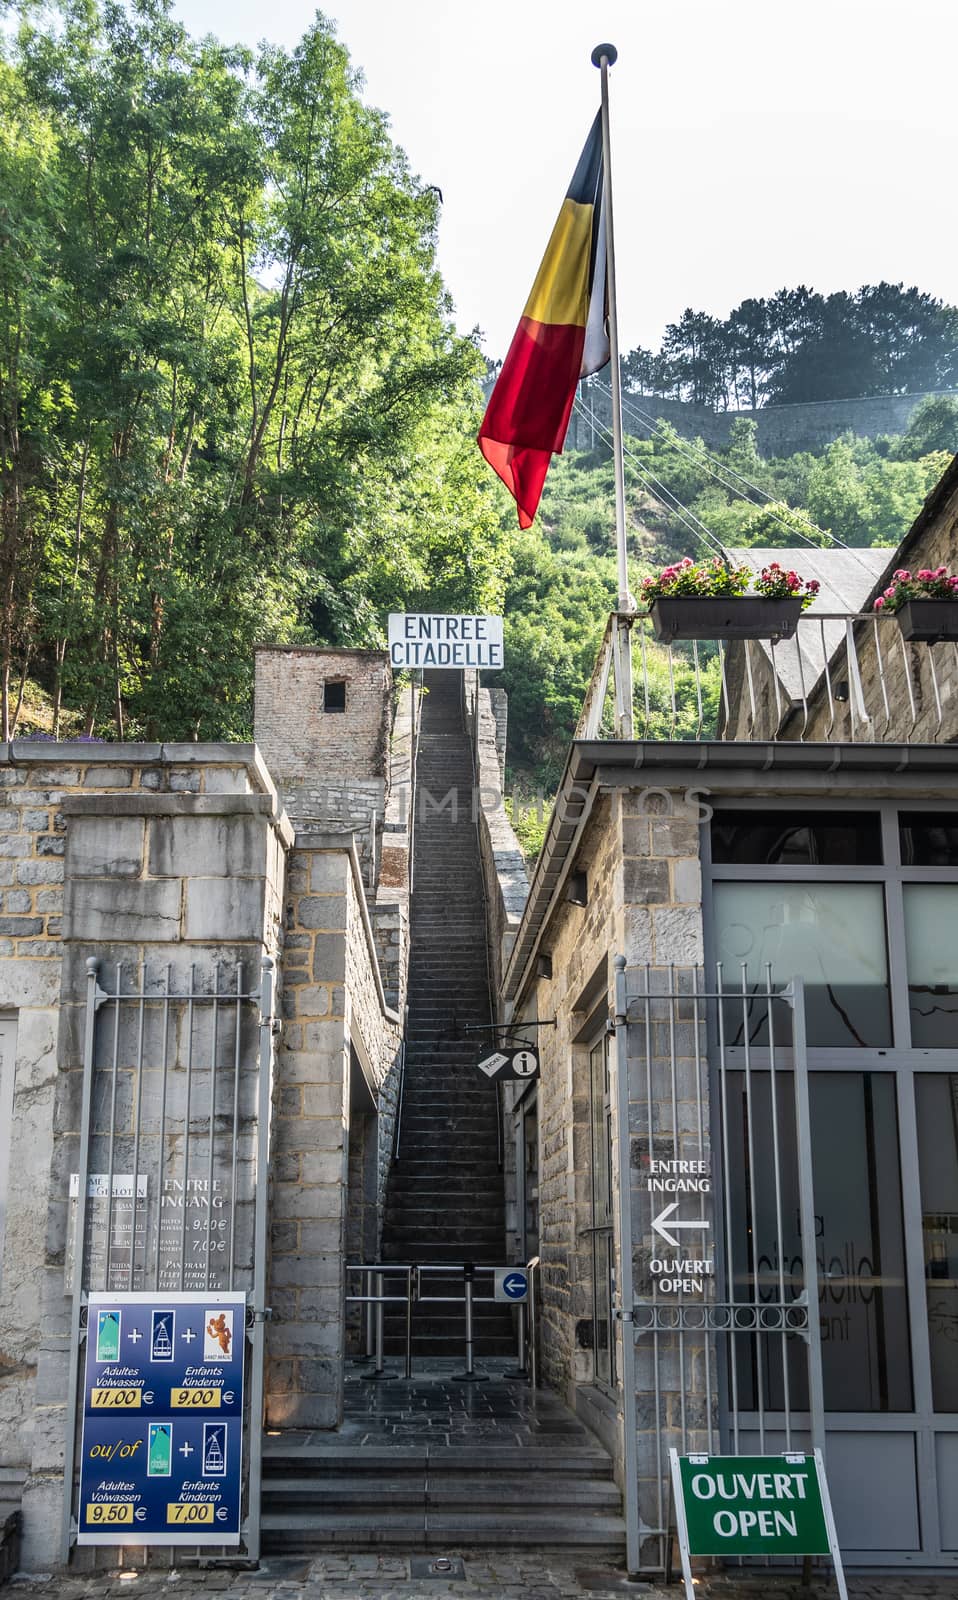 Dinant, Belgium - June 26, 2019: Entrance to the long naroow brown stone stairway up to the citadel, captured in green foliage and Belgian flag in front.